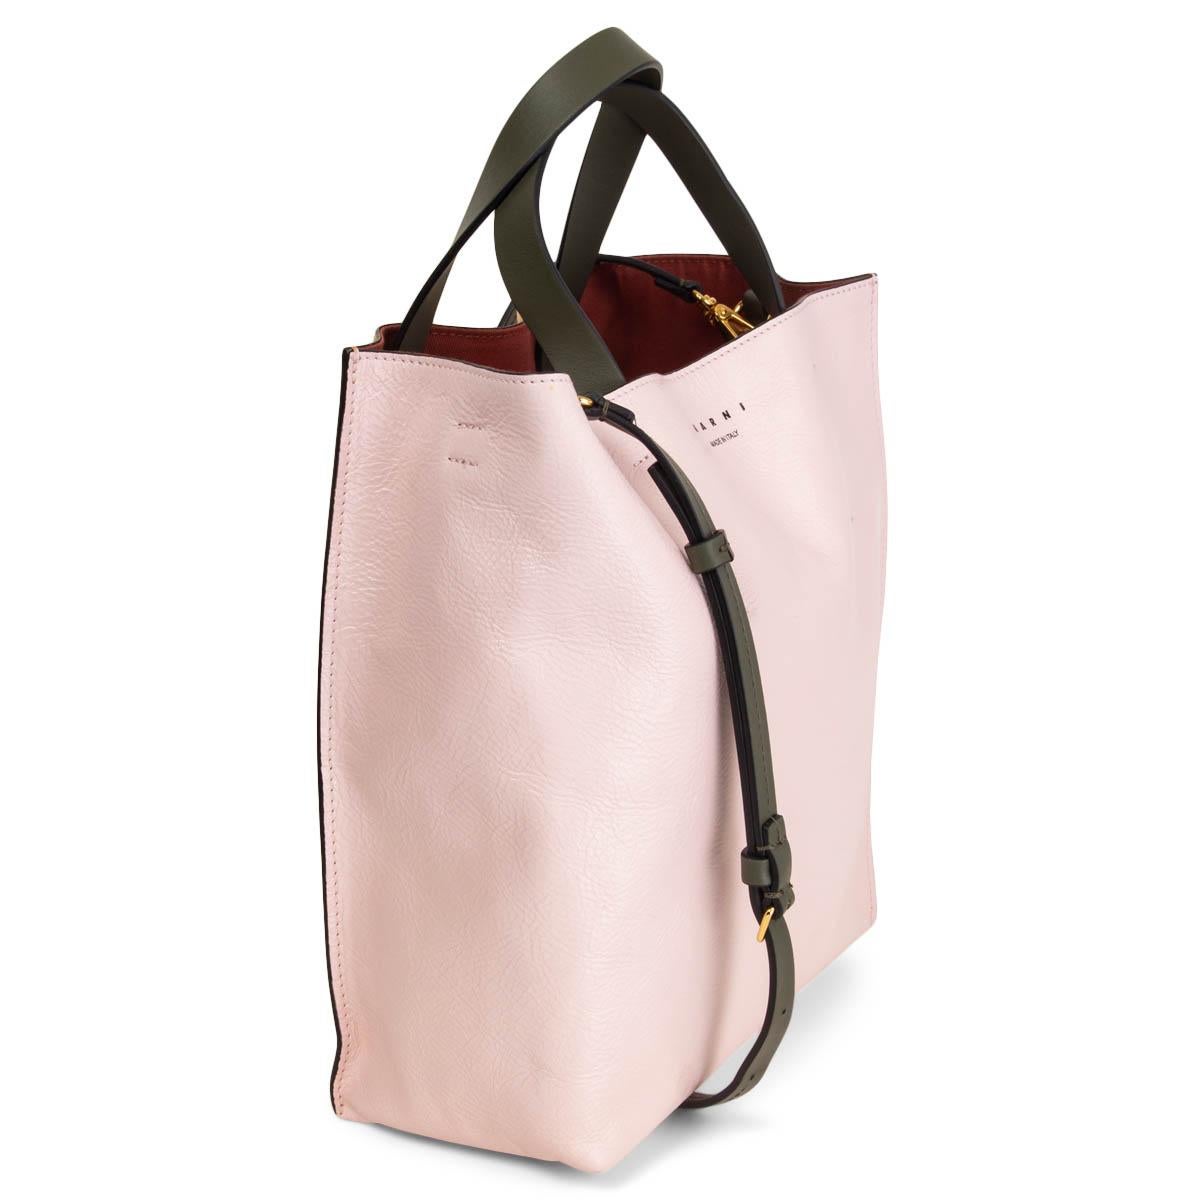 100% authentic Marni Museo Small tote bag in tricolor pale rose, pale yellow and olive green calfskin. Contrasting internally applied handles and edges. Lined in burgundy canvas with one leather zipper pocket against the back. Adjustable and